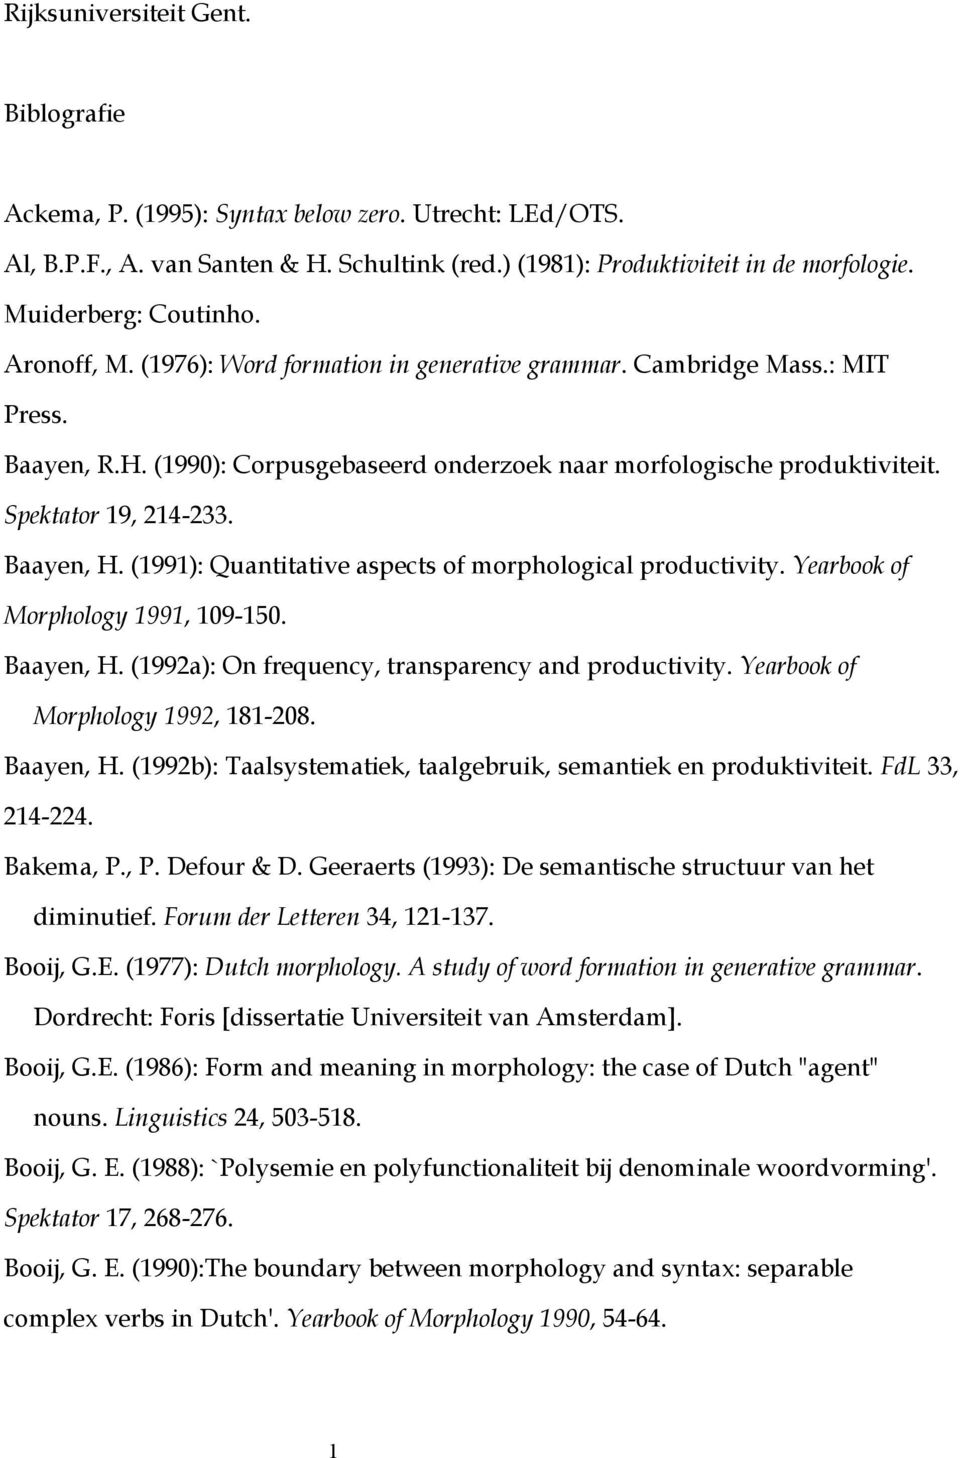 (99): Quantitative aspects of morphological productivity. Yearbook of Morphology 99, 09-50. Baayen, H. (992a): On frequency, transparency and productivity. Yearbook of Morphology 992, 8-208.